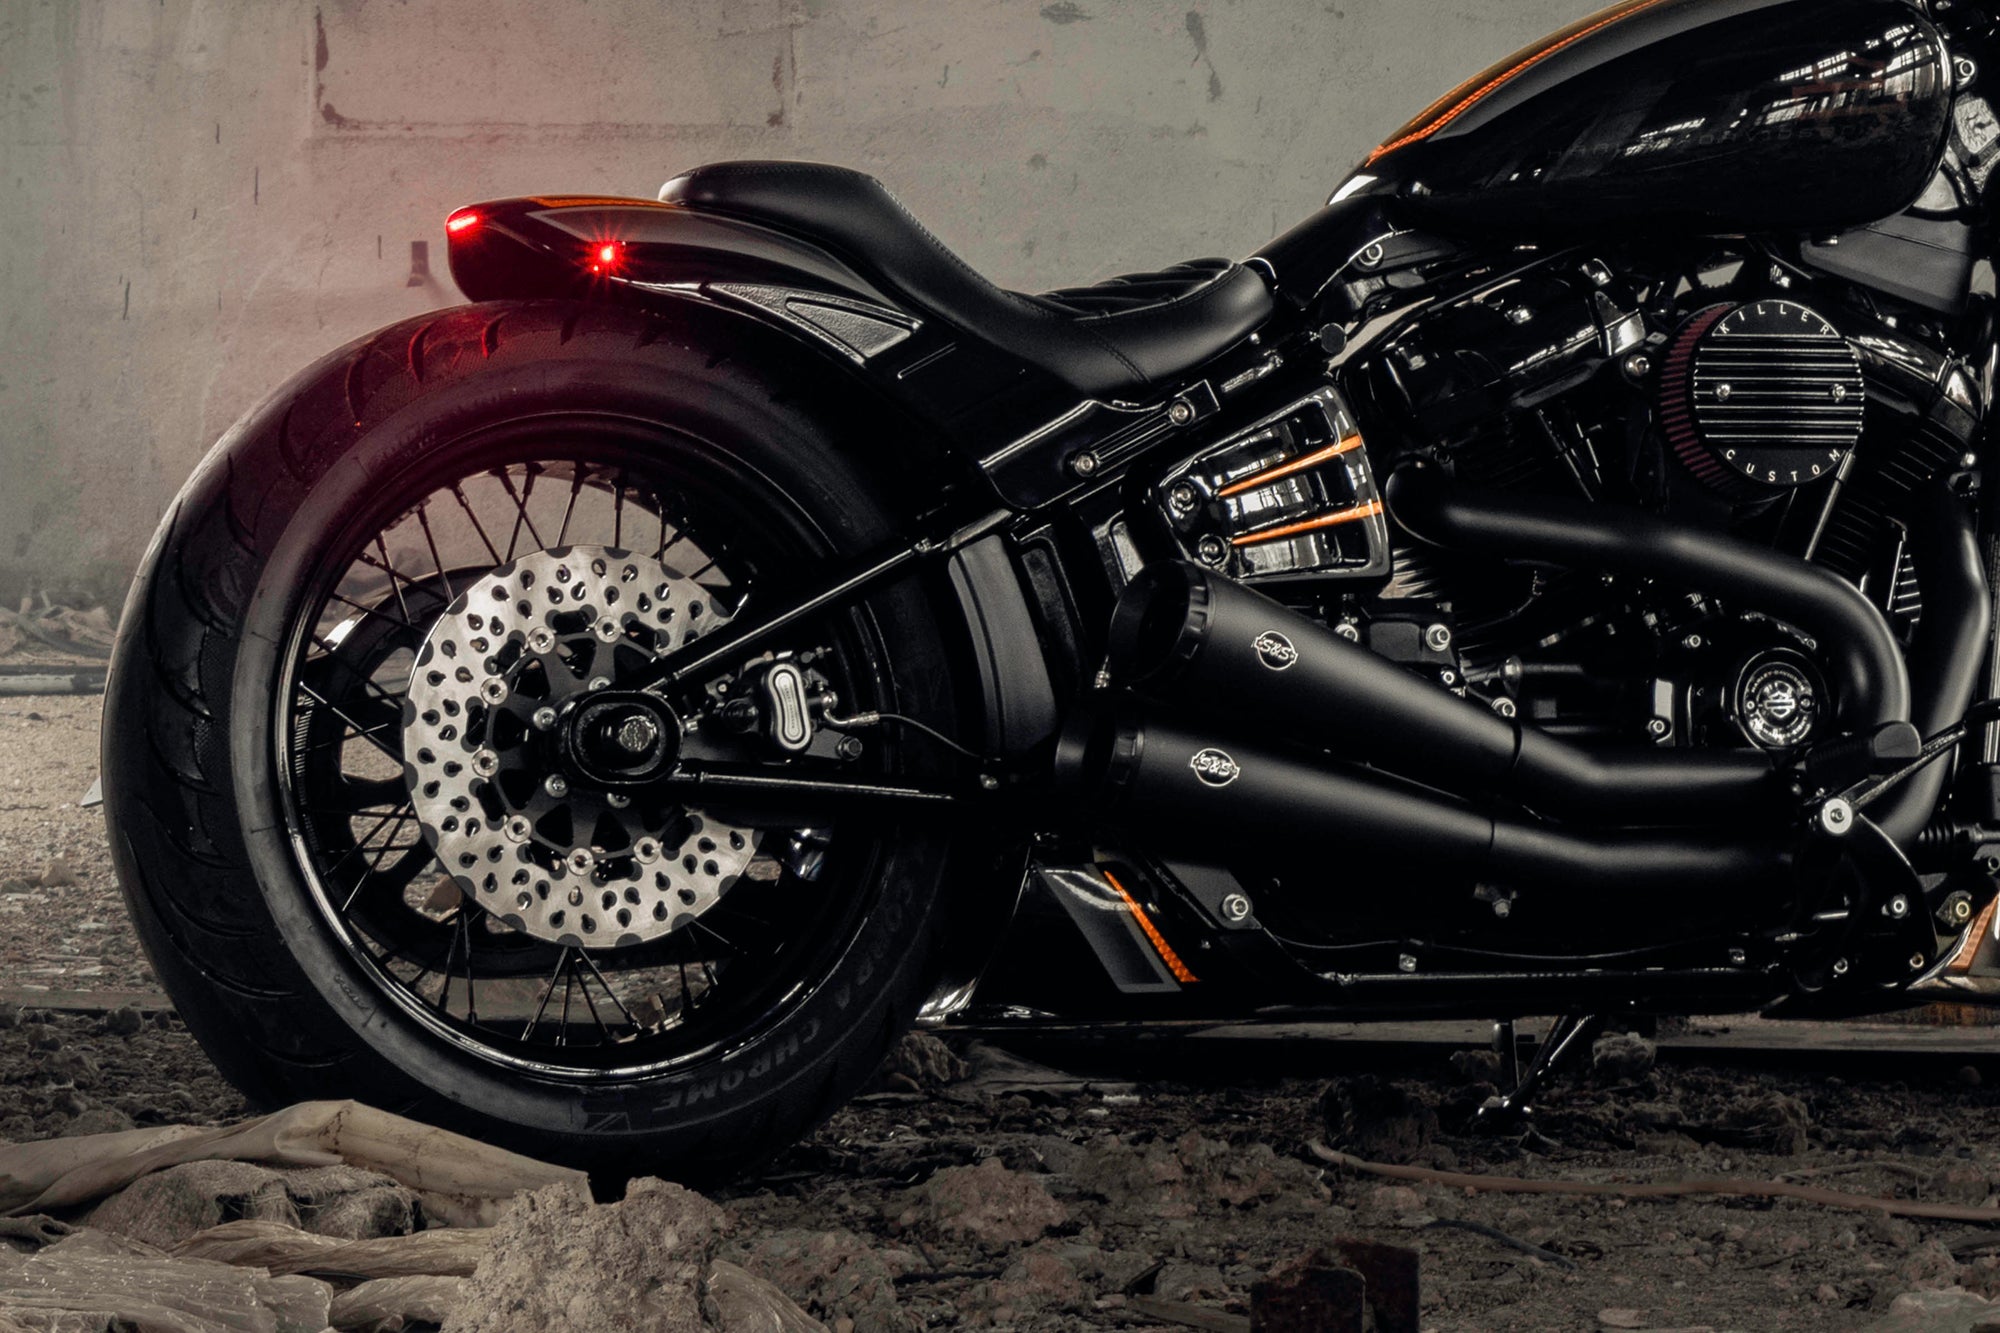 Zoomed Harley Davidson motorcycle with Killer Custom parts from the side in an abandoned building